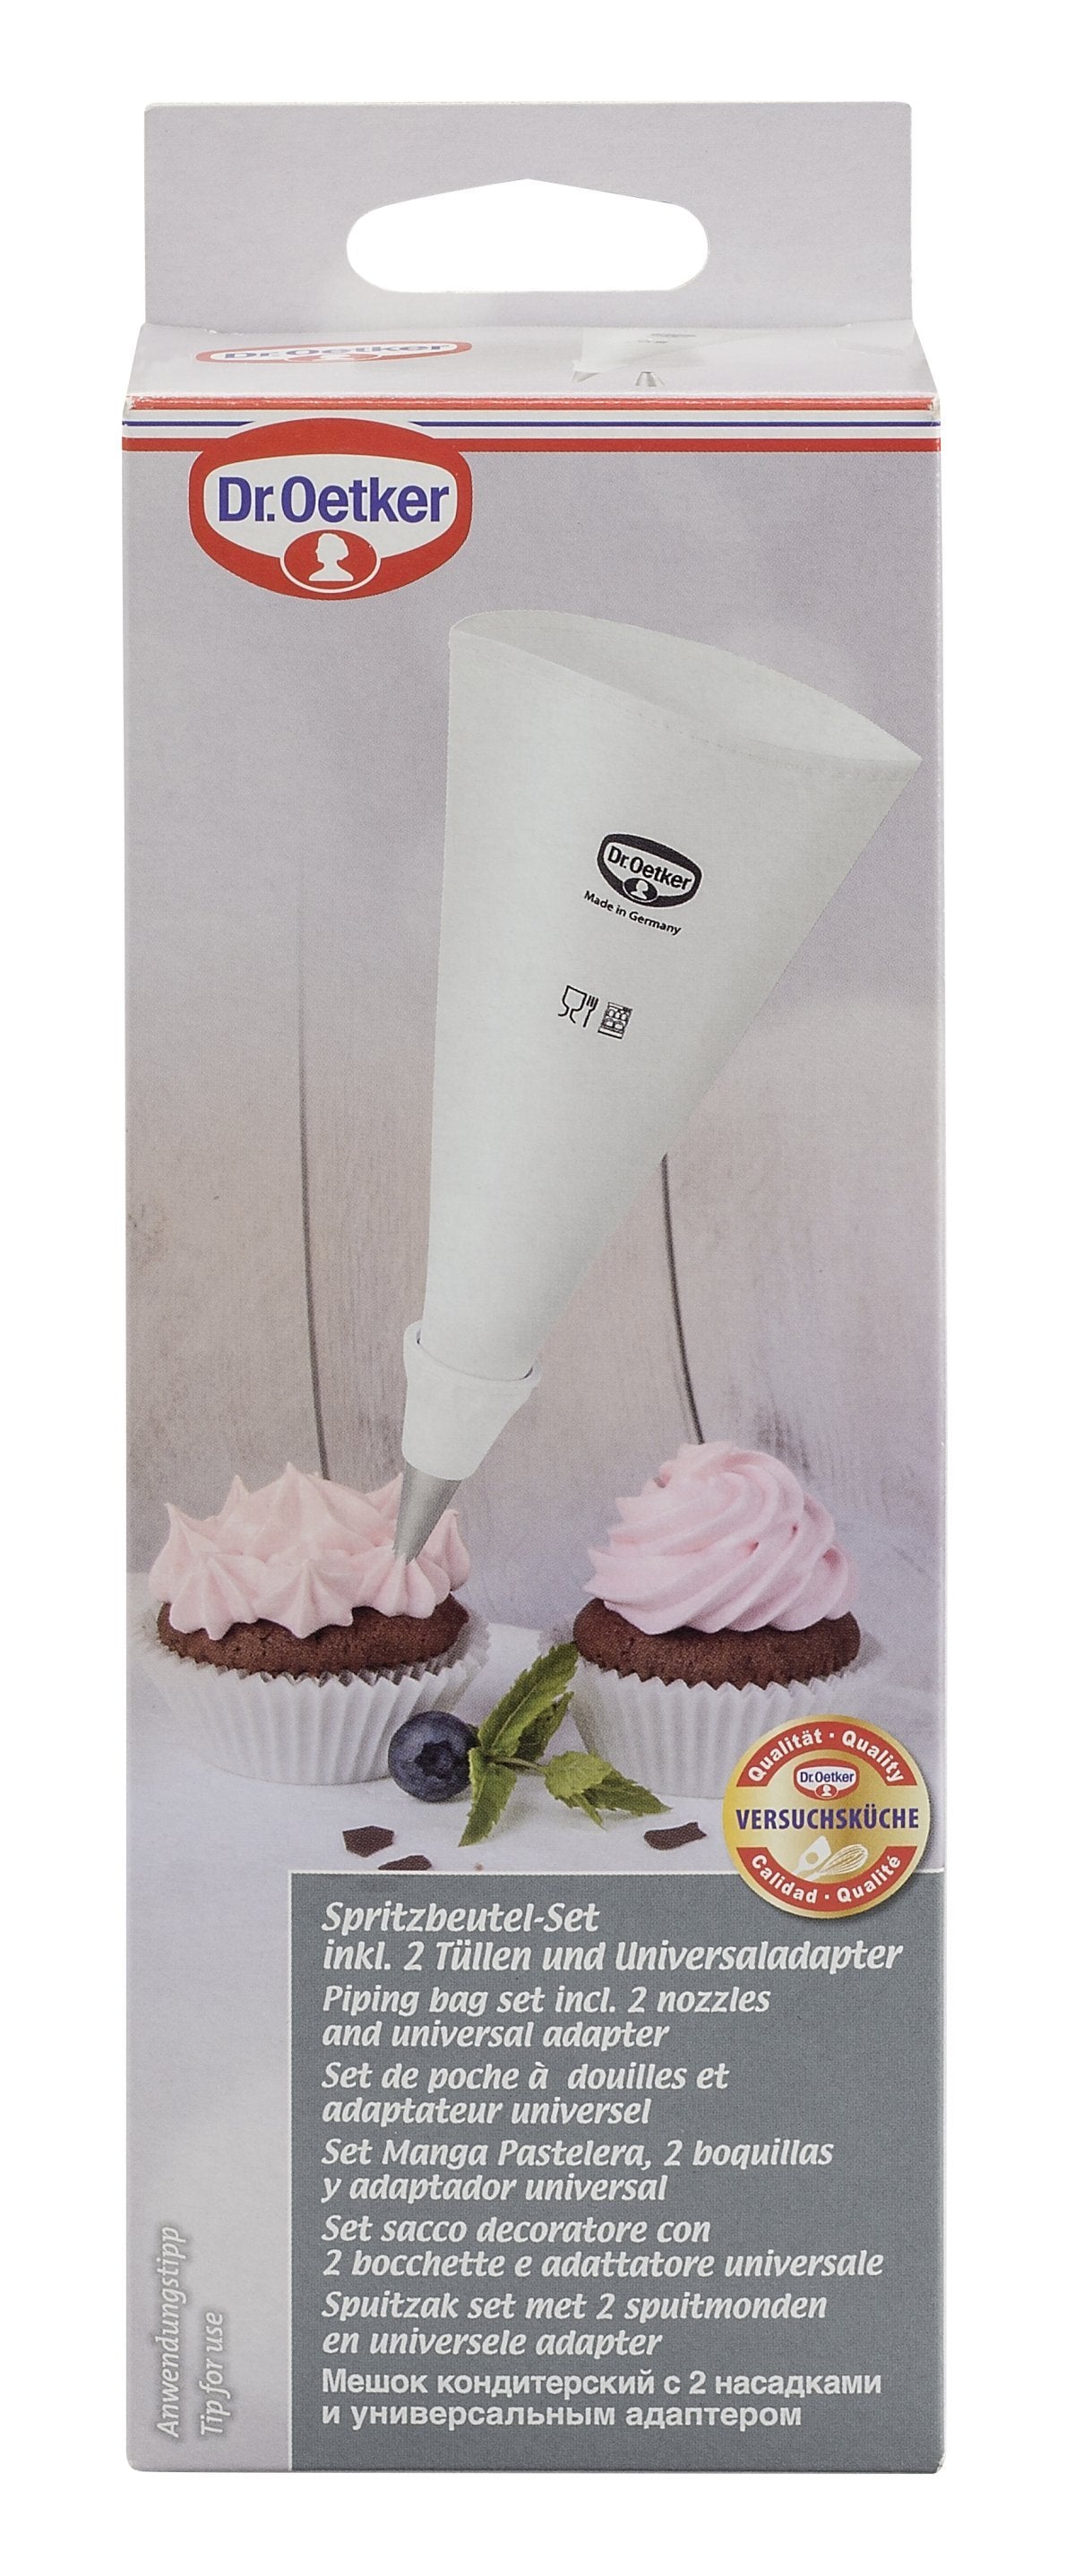 Dr.Oetker Stainless Steel Piping Bag W/ 2 Nozzles + Universal Adapter